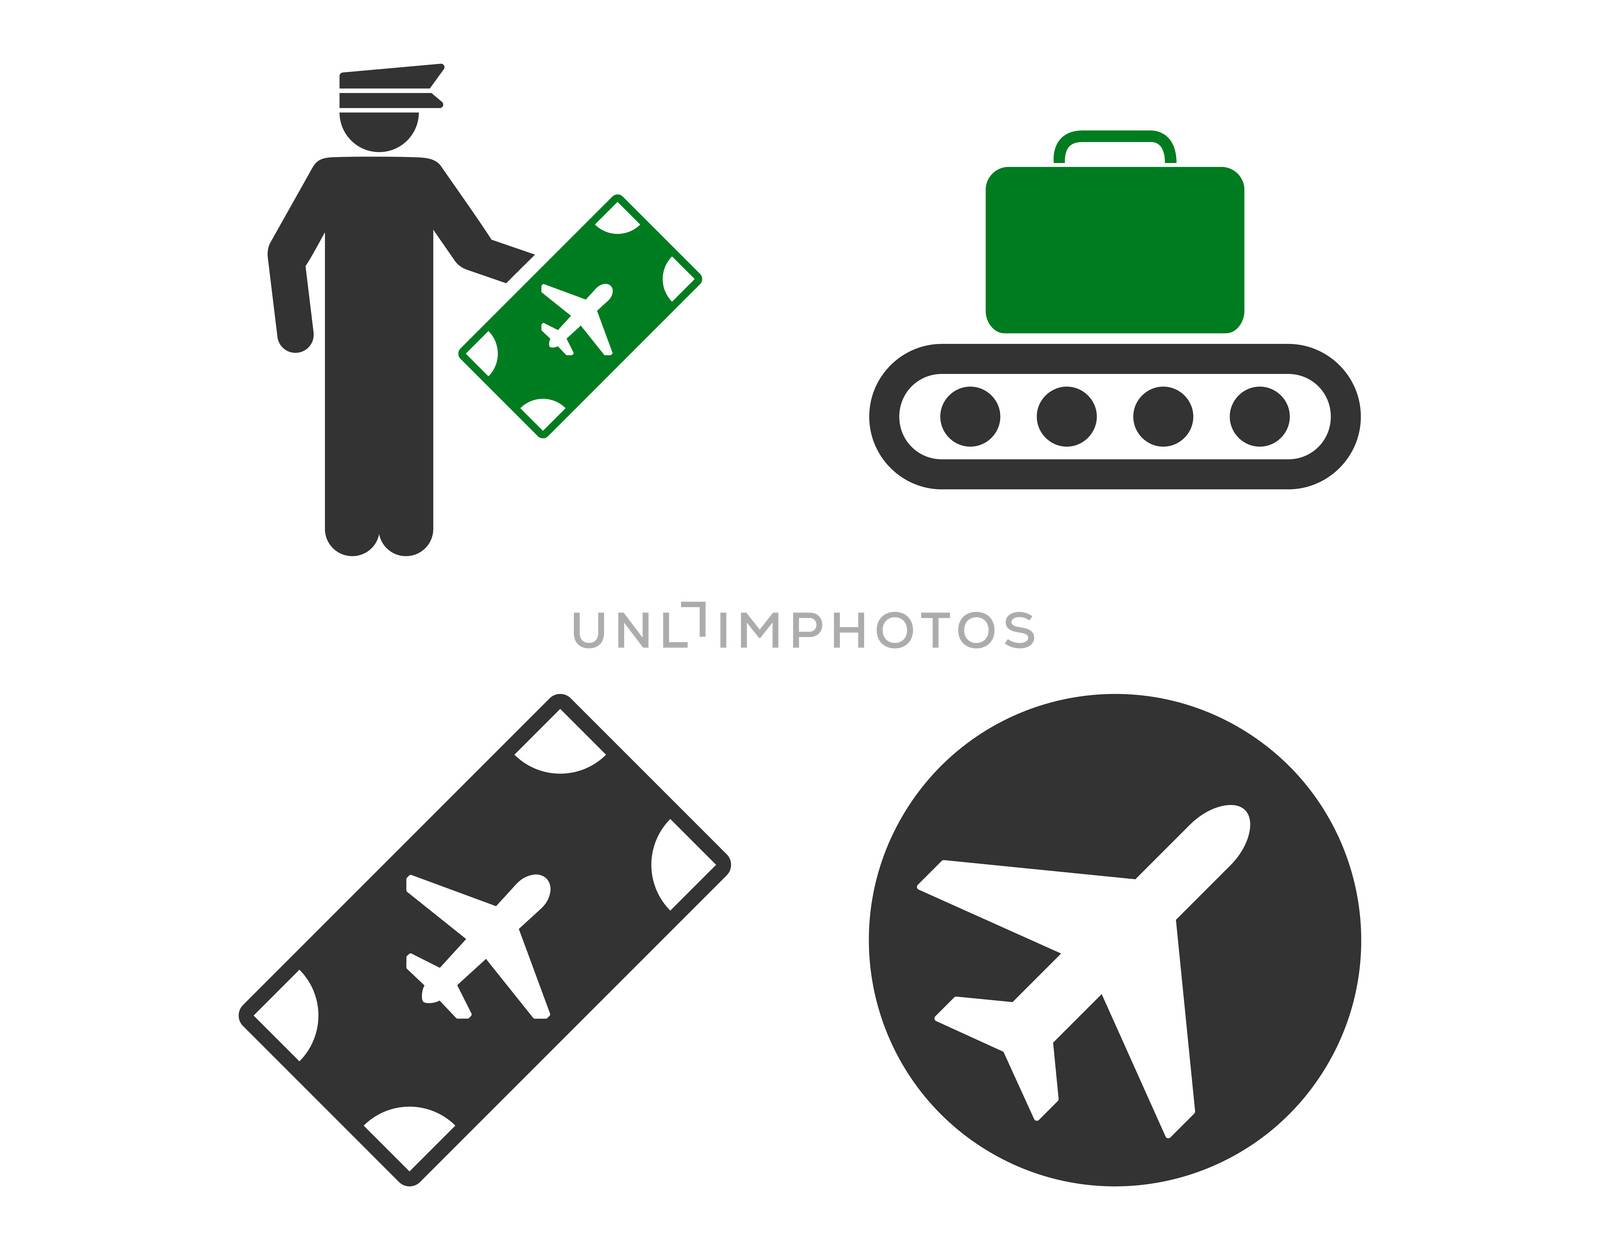 Aviation Icon Set. These flat bicolor icons use green and gray colors. Raster images are isolated on a white background.